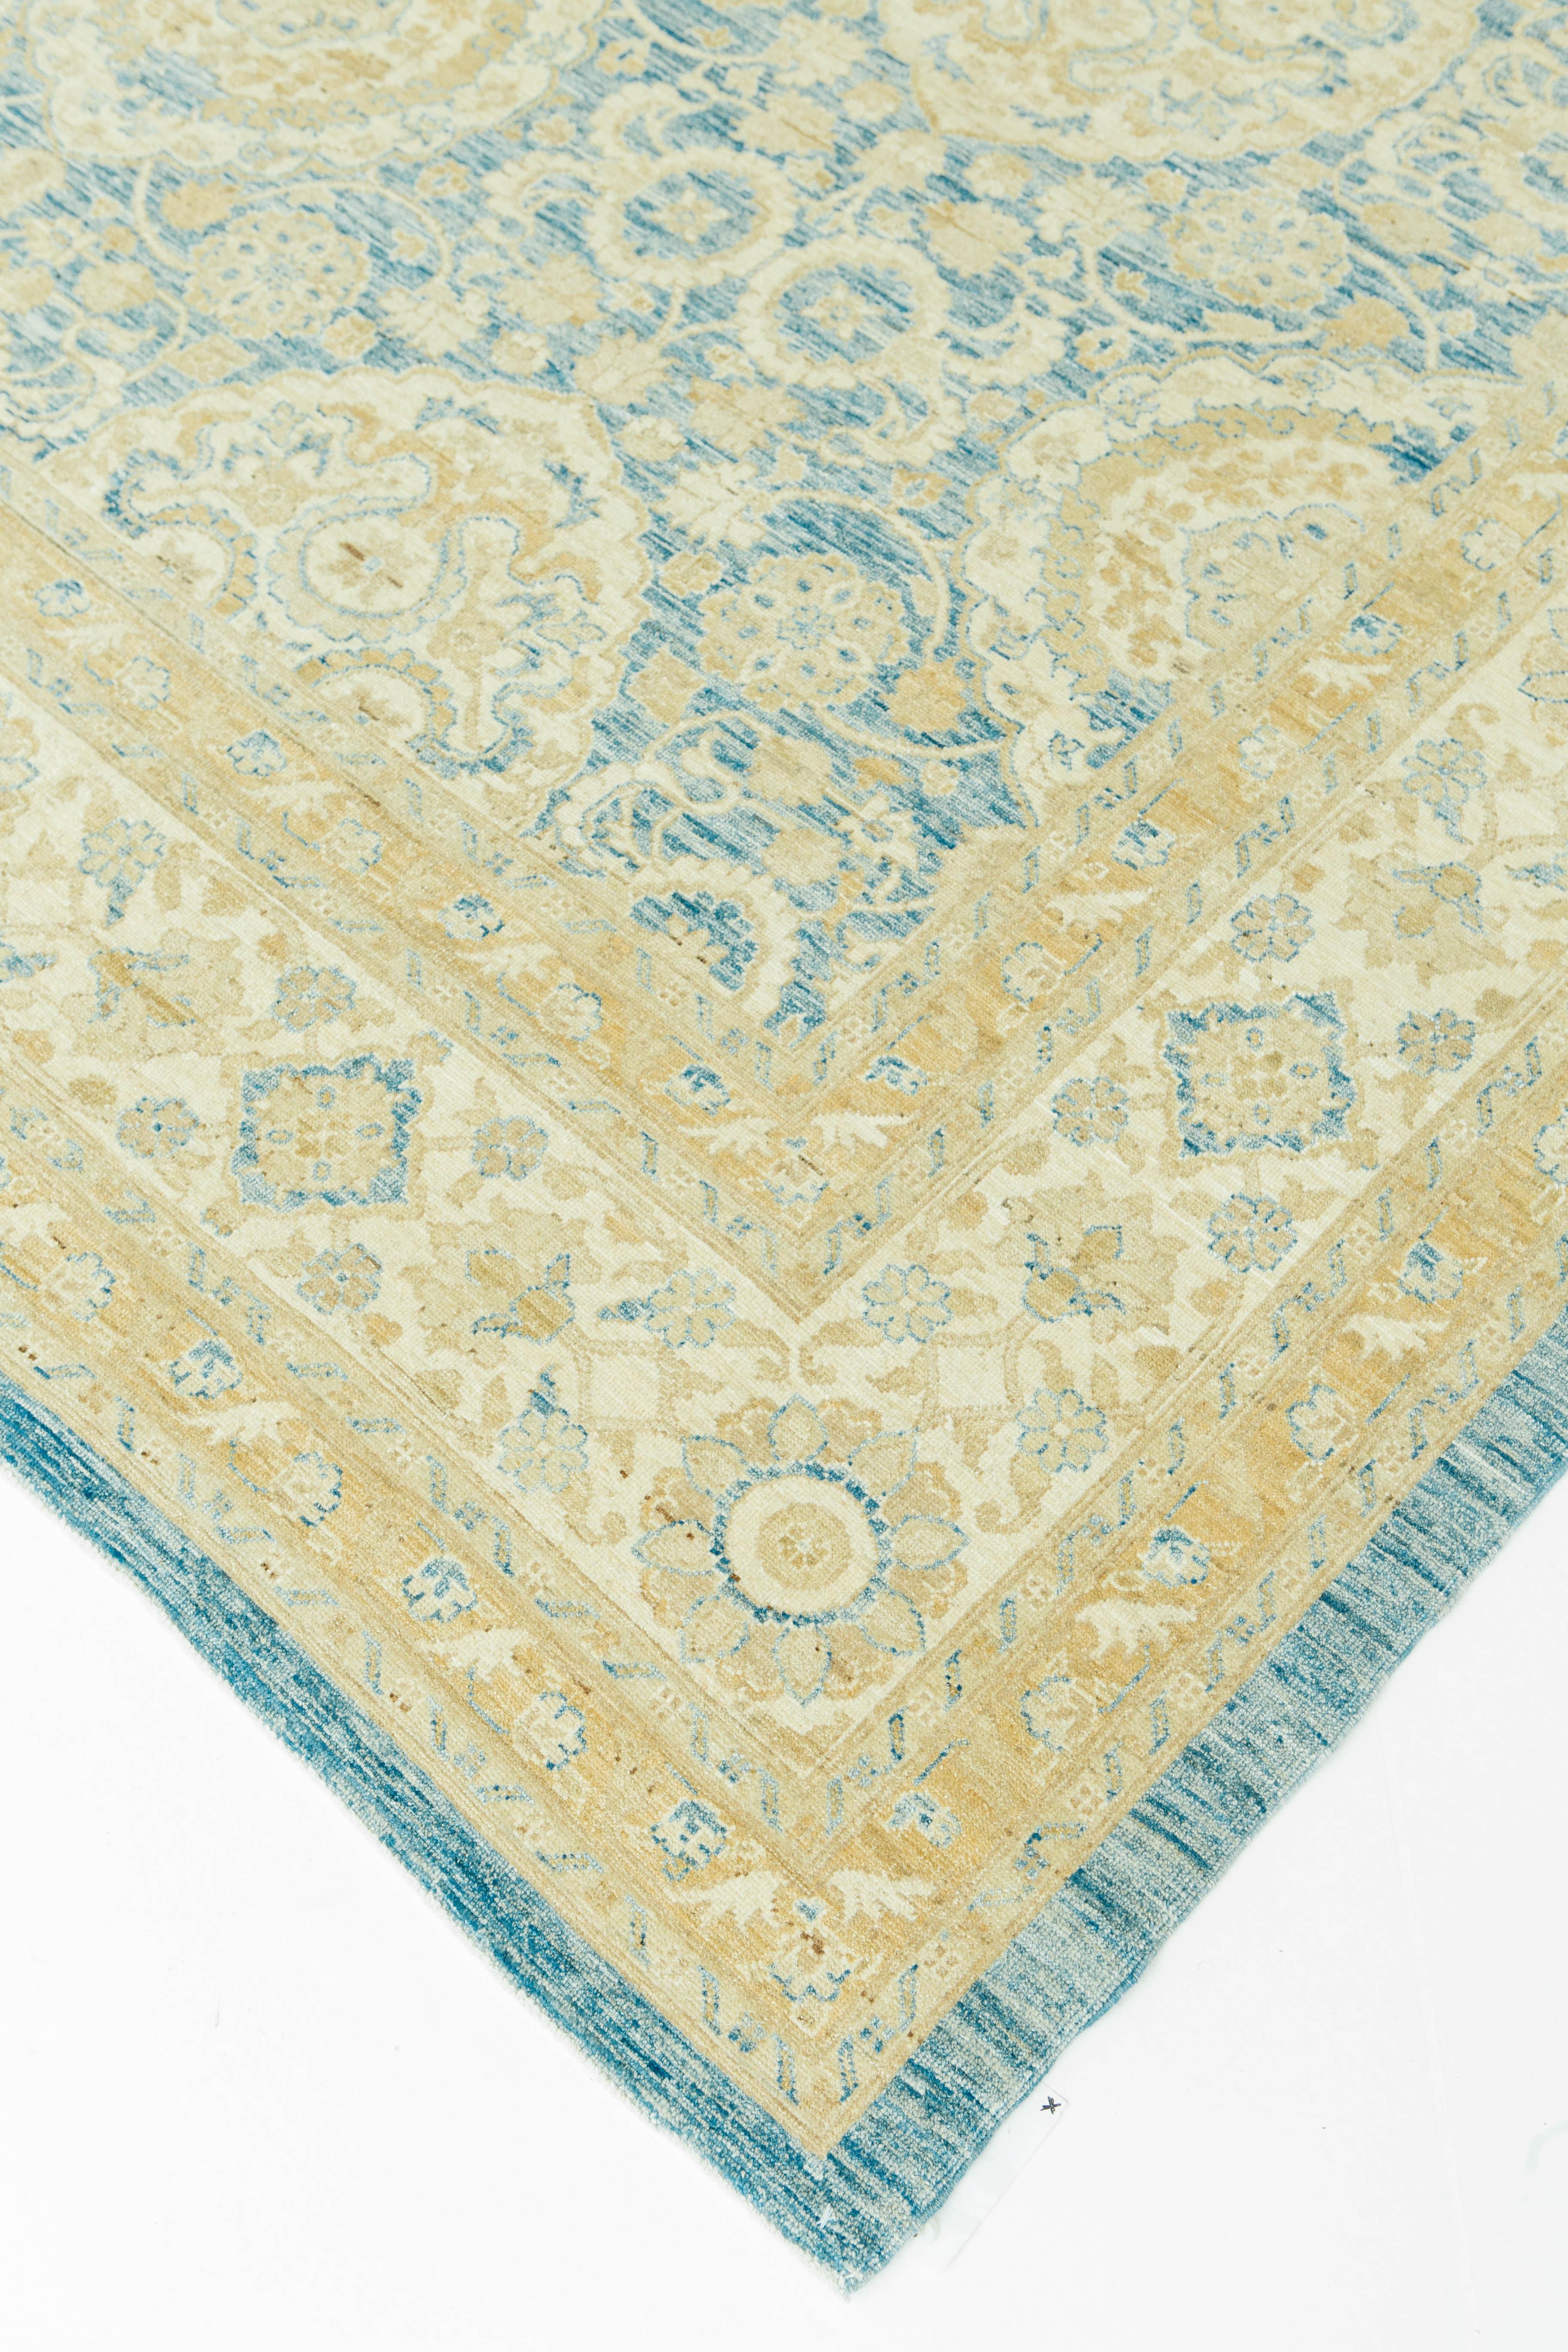 This vintage Agra style recreation is both elegant and detailed to perfection. Weavers of Agra were masters at vegetable dying as they popularized gold and soft mid-tone blues. The colors and medallion motifs of this rug weave together into a